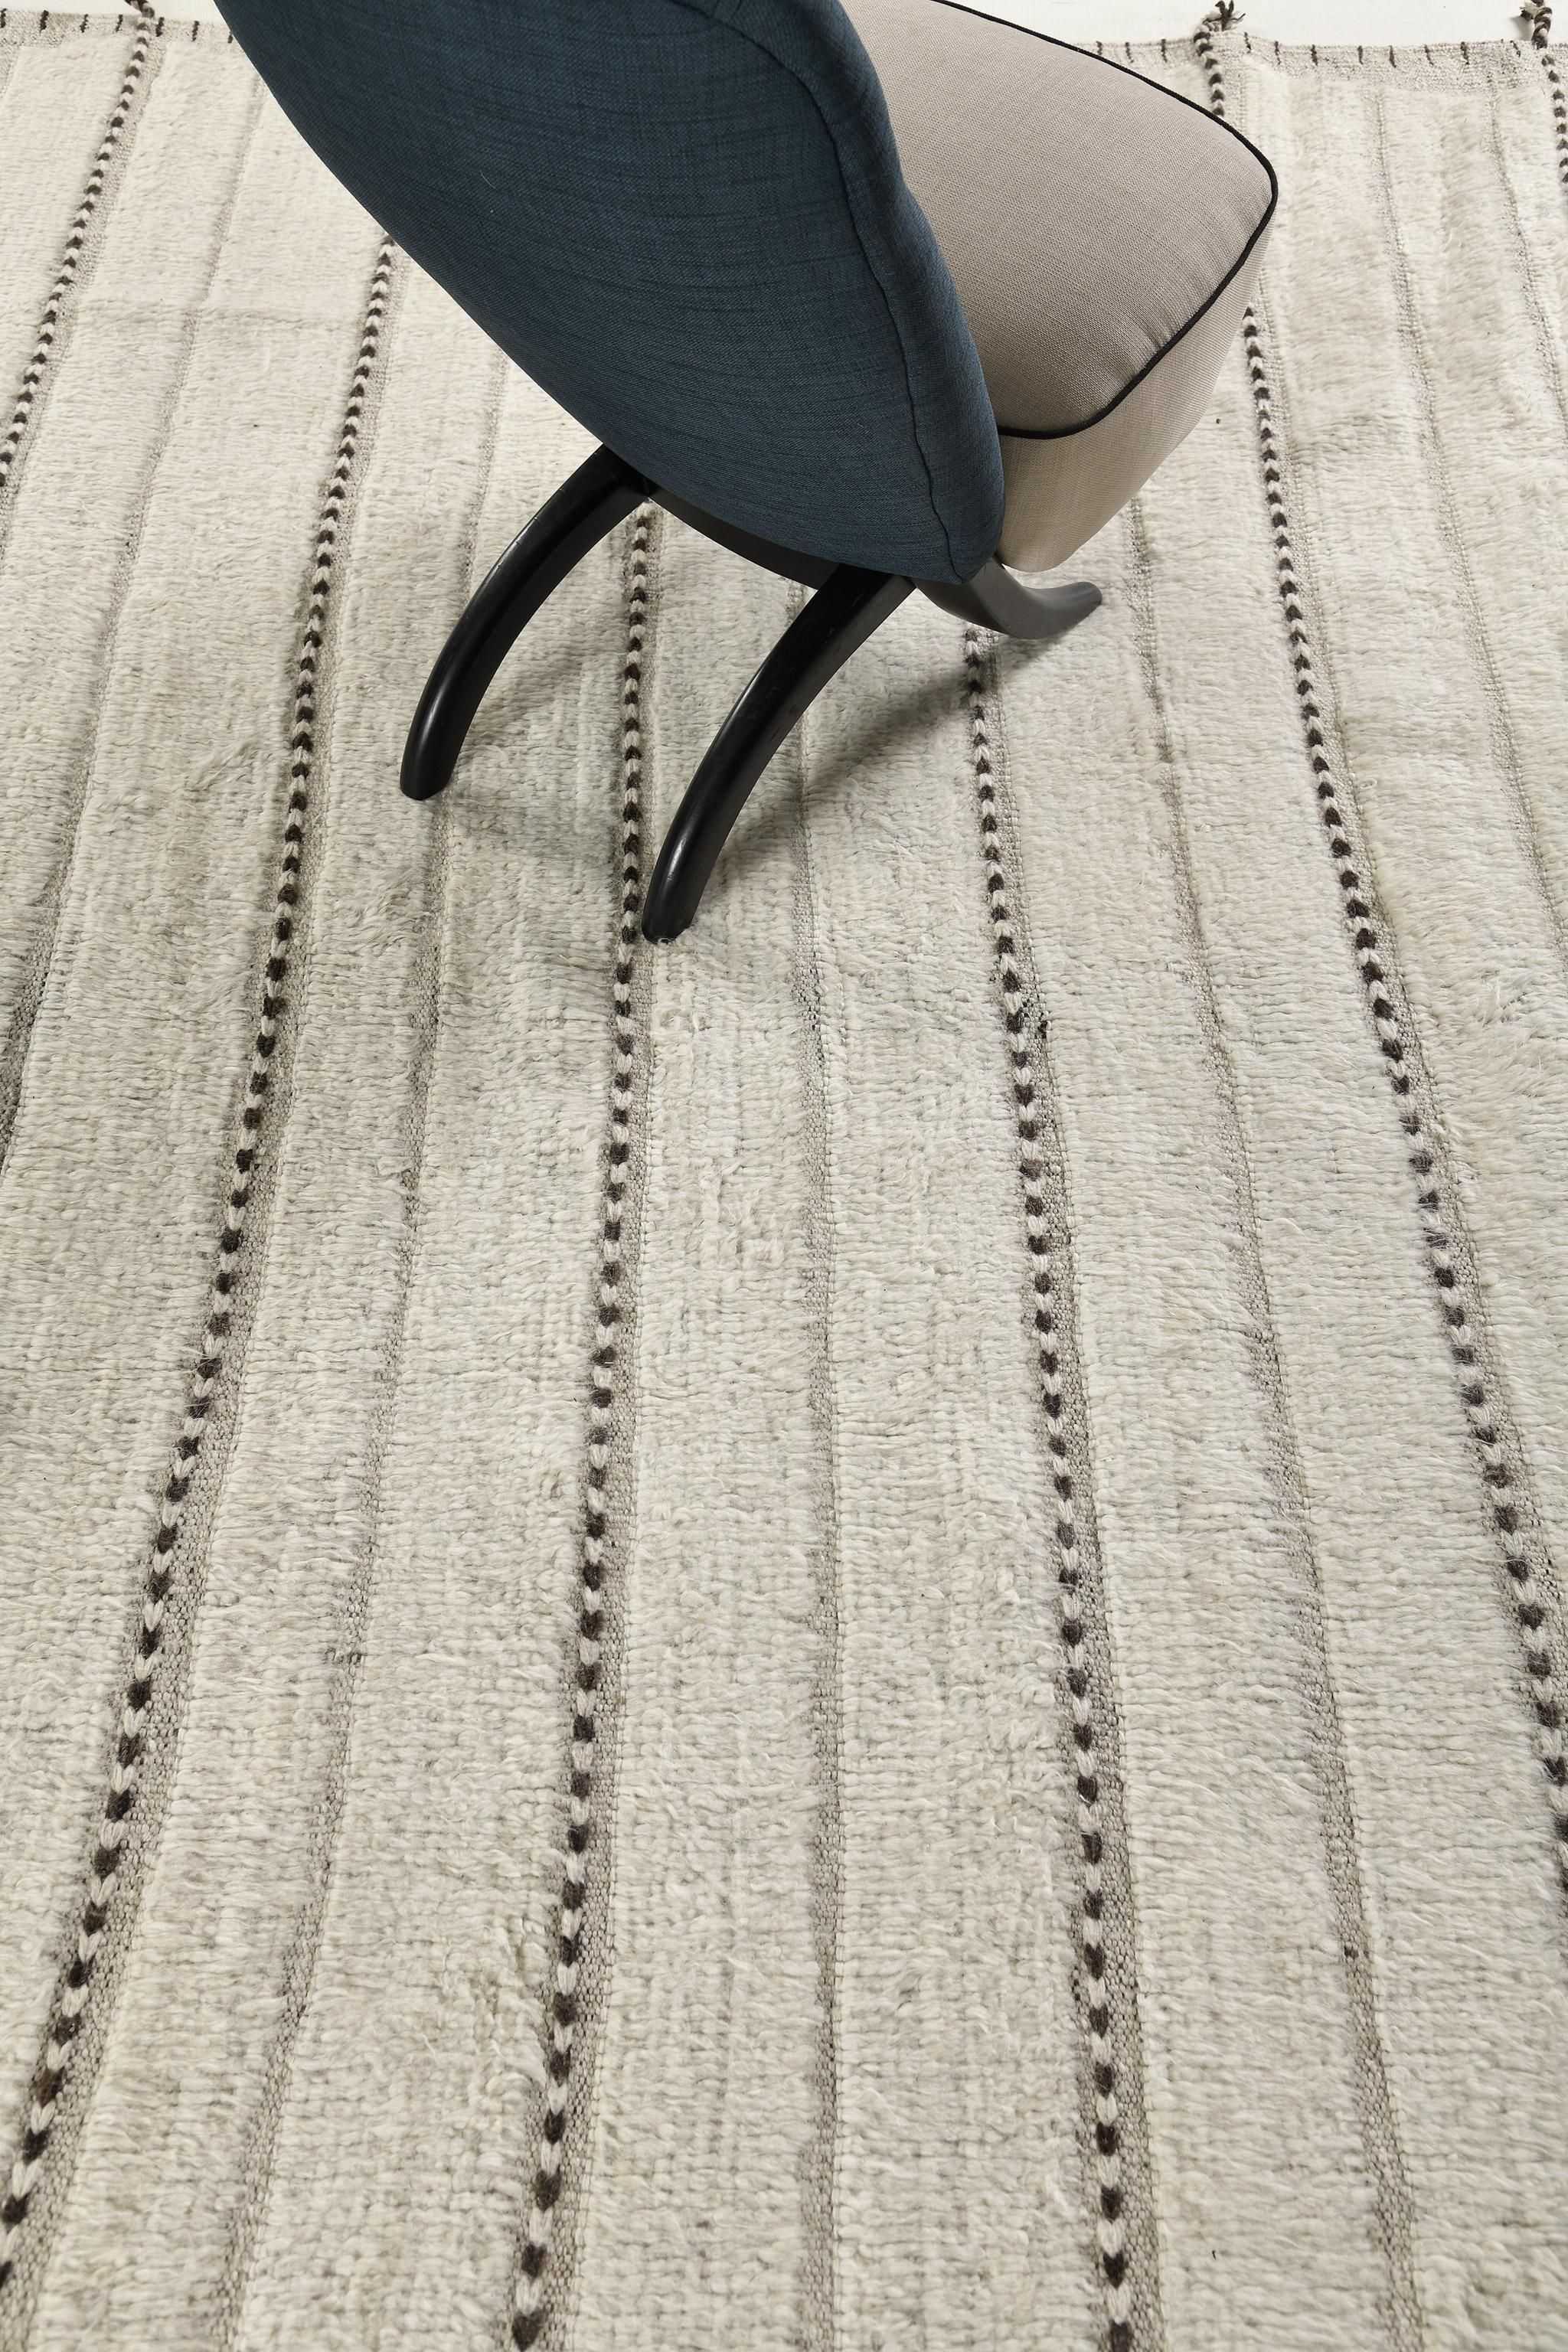 Abrolhos is a handwoven luxurious wool rug with timeless embossed detailing. In addition to its perfect ivory flatweave, Albrohos has a beautiful shag that brings a lustrous texture and contemporary feel to one's space. The Haute Bohemian collection